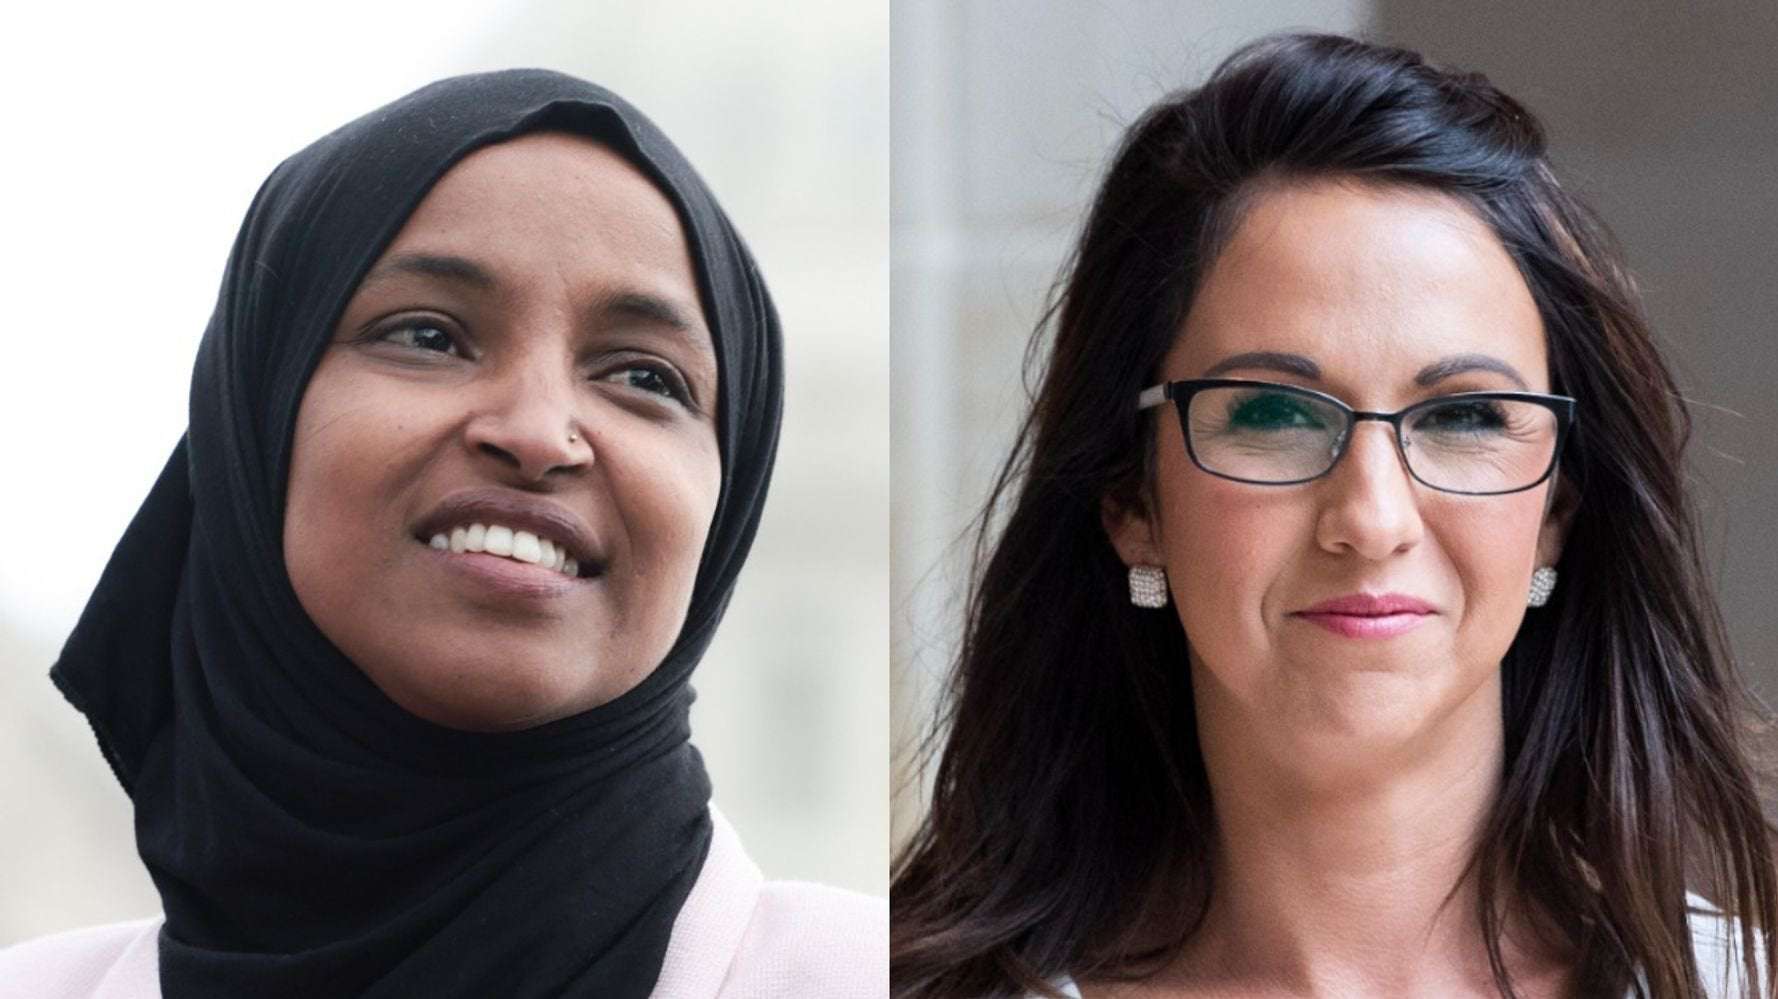 image for Ilhan Omar Rips Lauren Boebert For Telling 'Made Up' Anti-Muslim Story For Clout